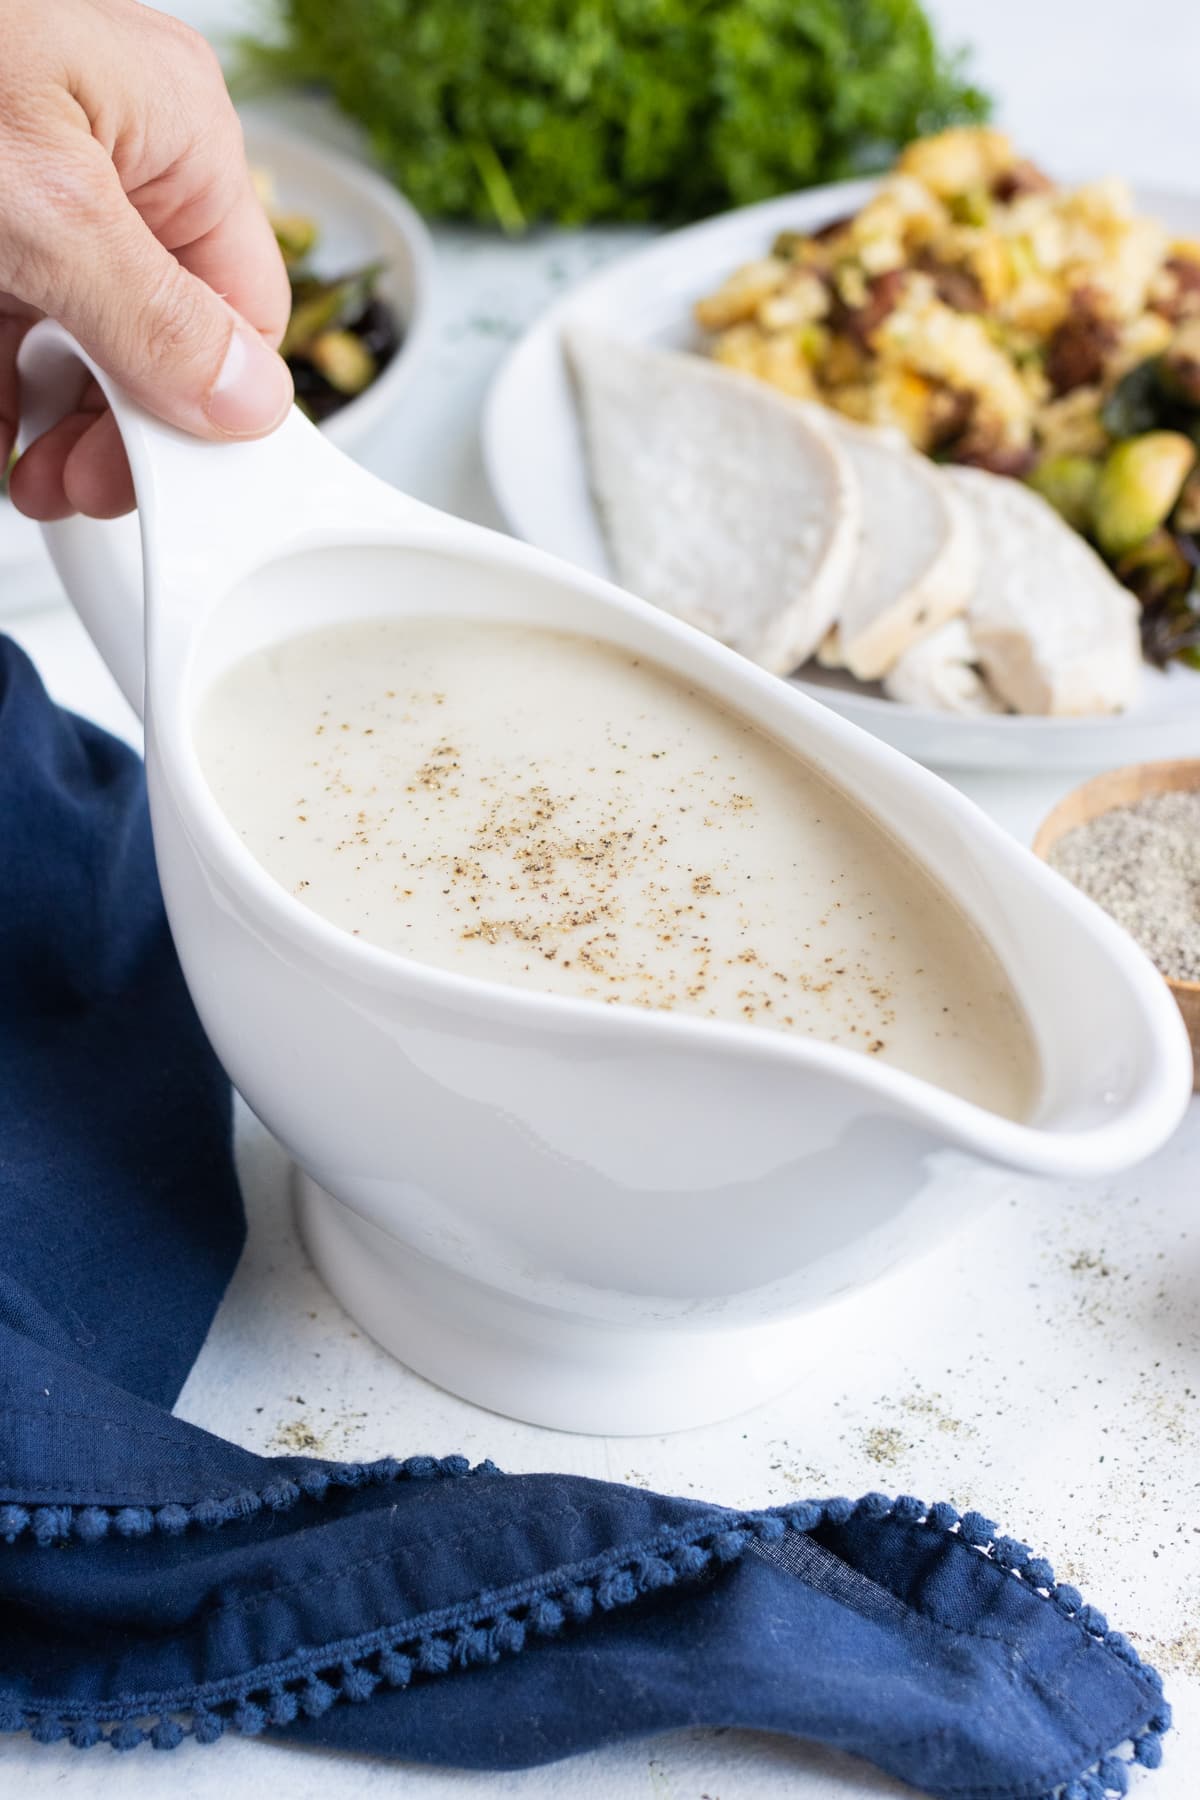 A gravy boat is full of homemade gravy made without drippings.